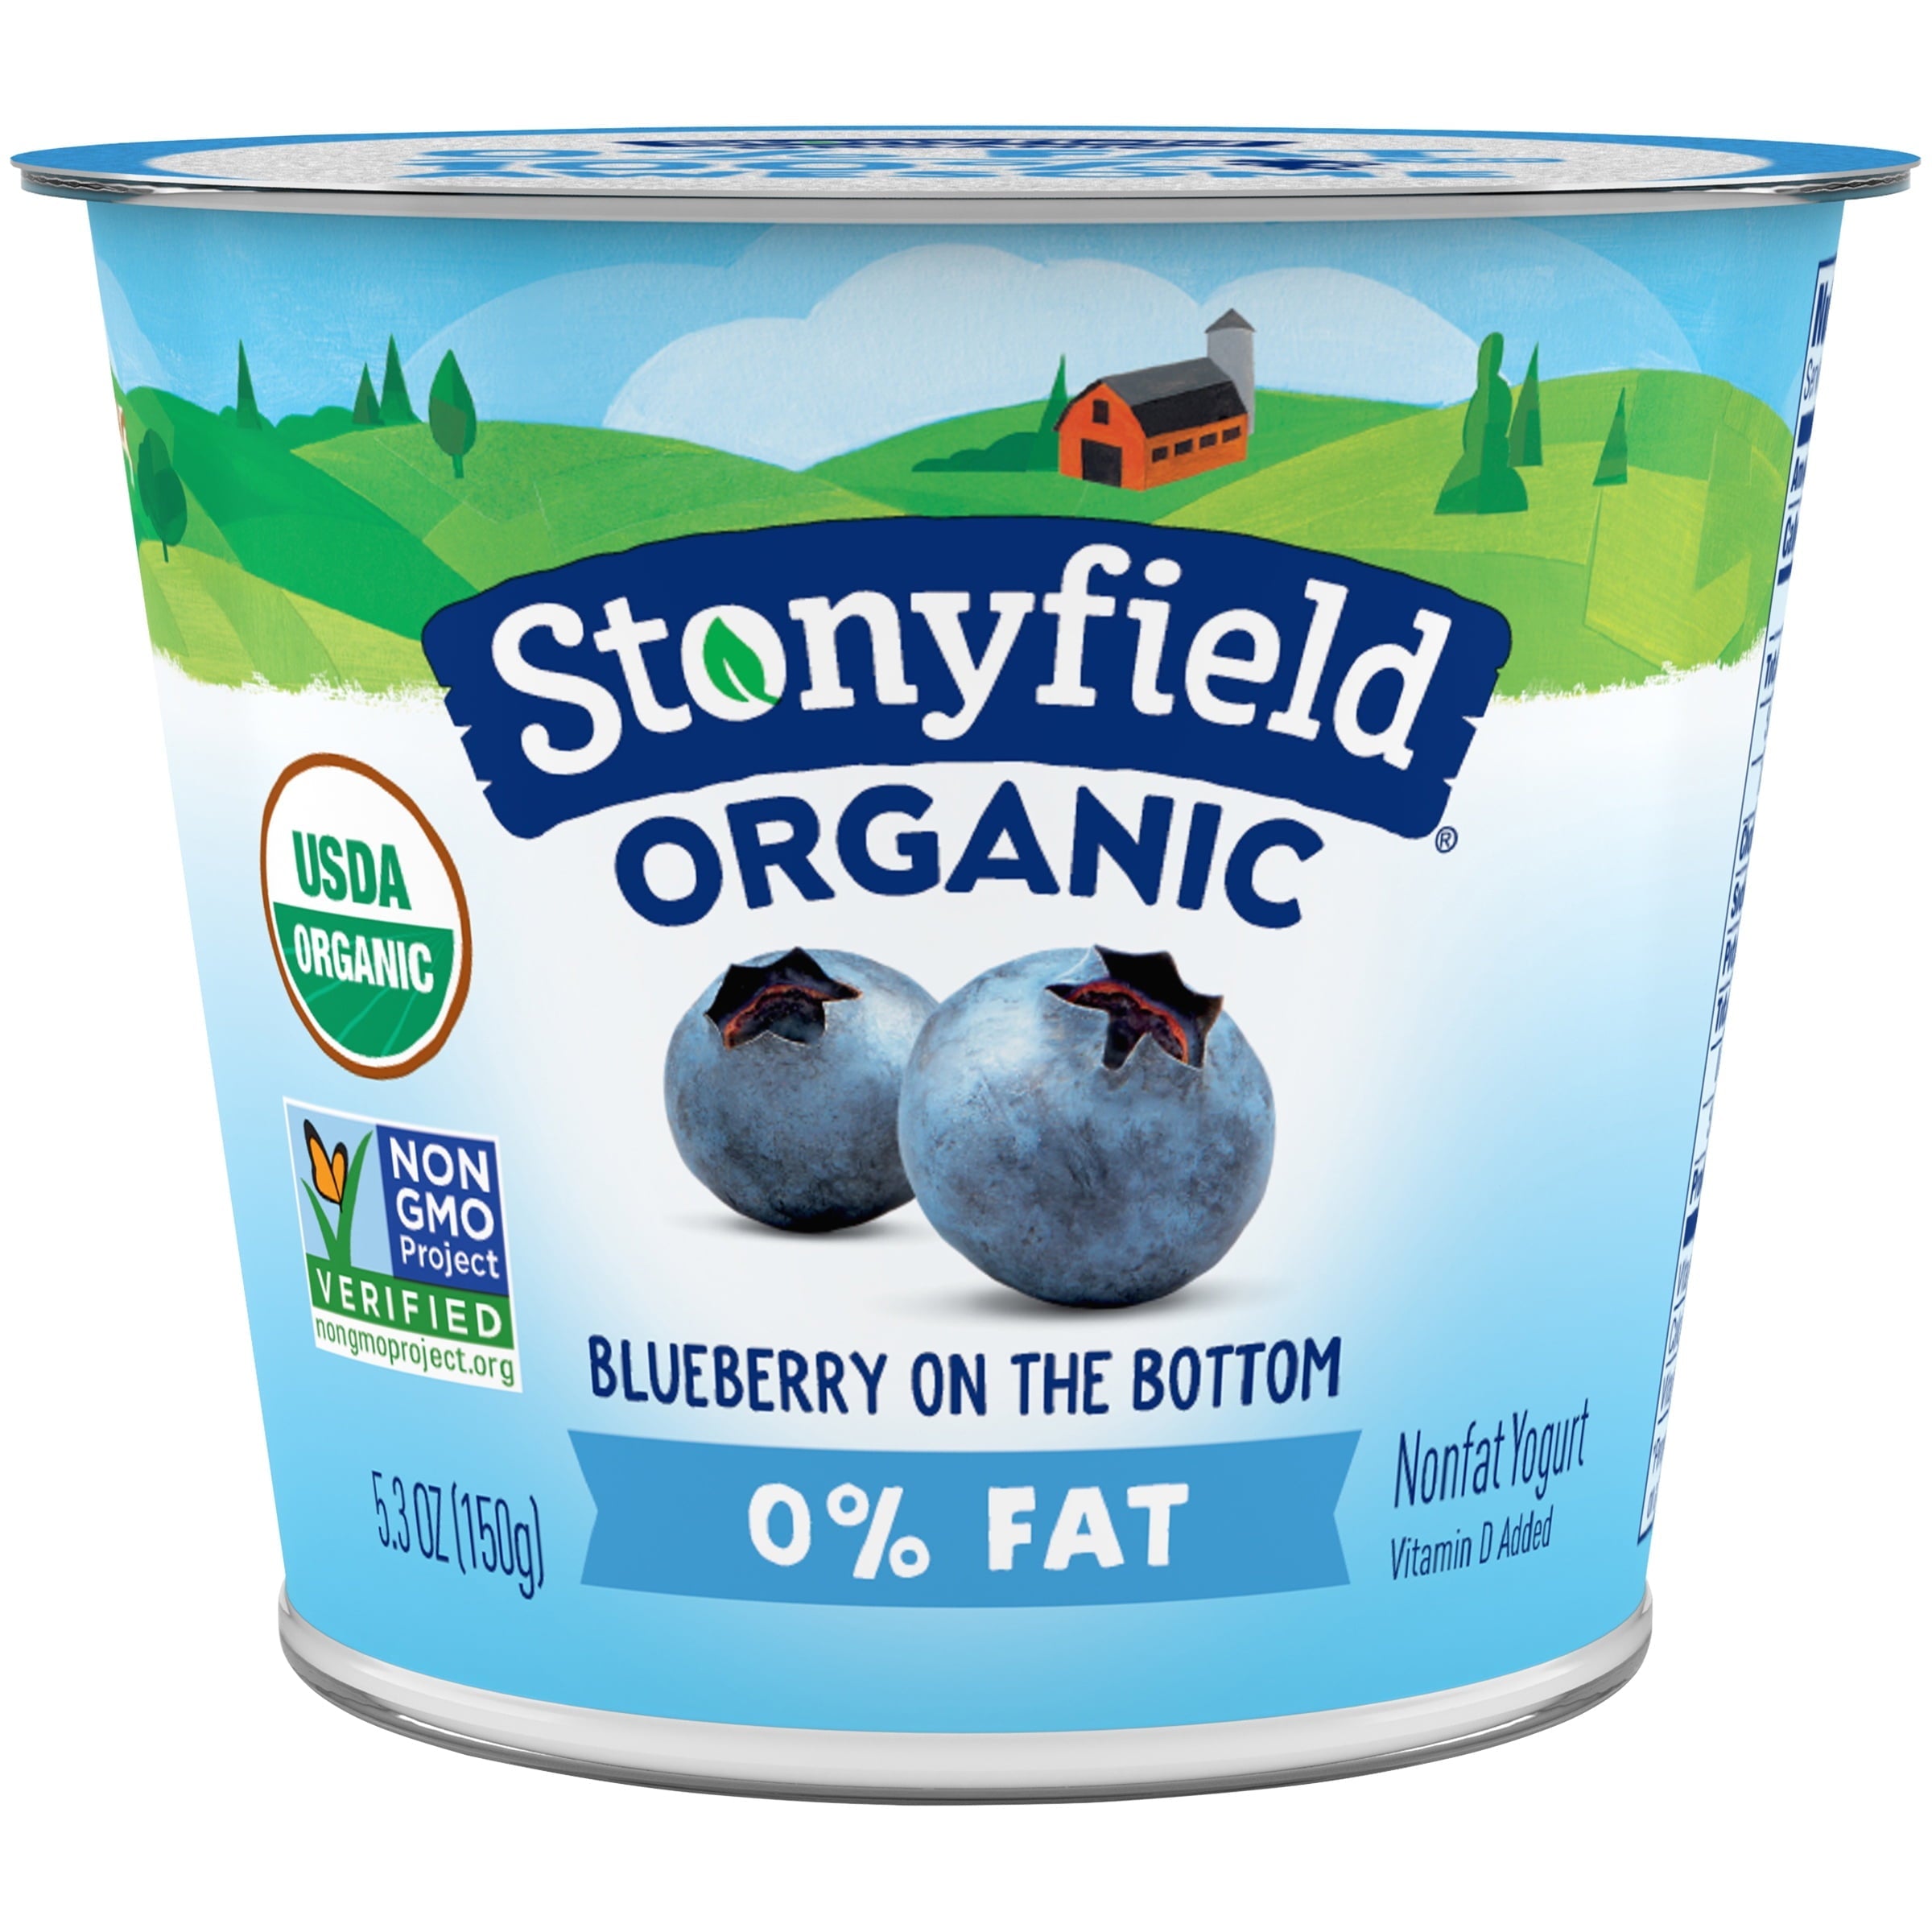 Stonyfield Organic Yogurt with Blueberry On The Bottom 5.3 Oz Cup